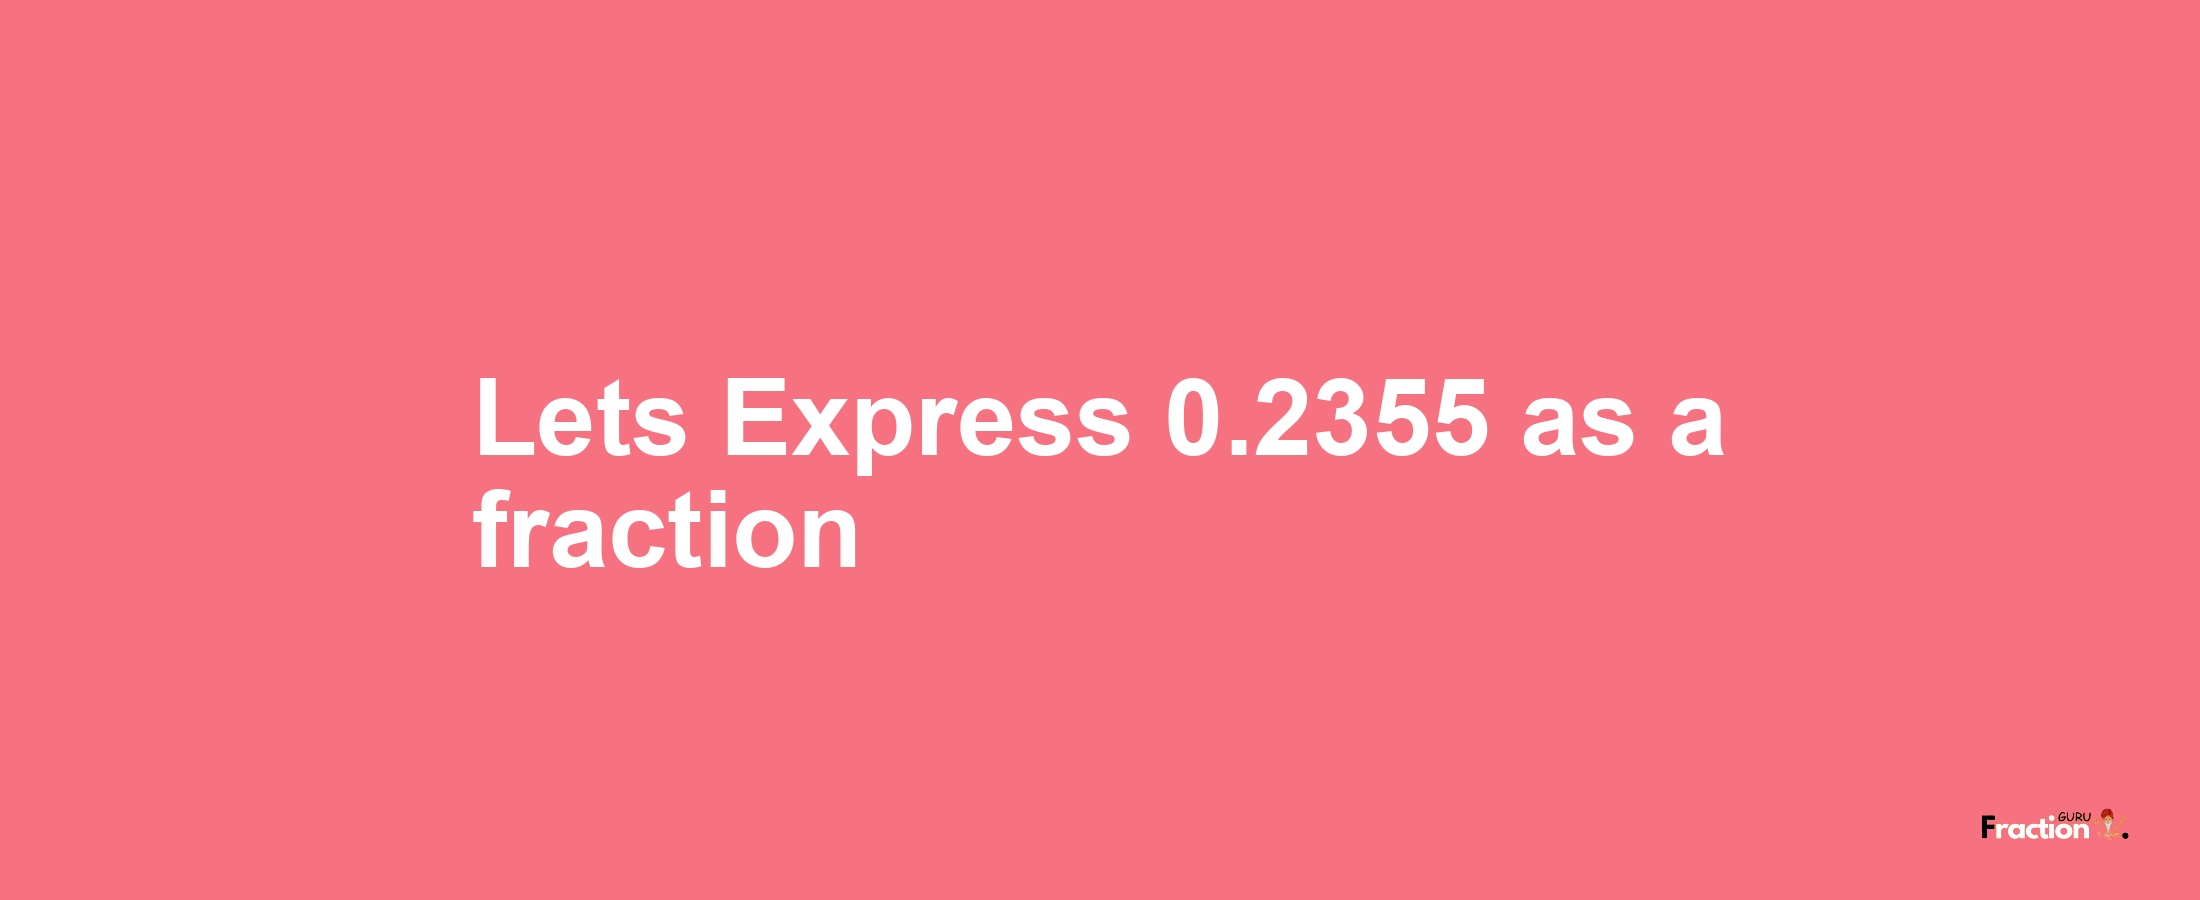 Lets Express 0.2355 as afraction